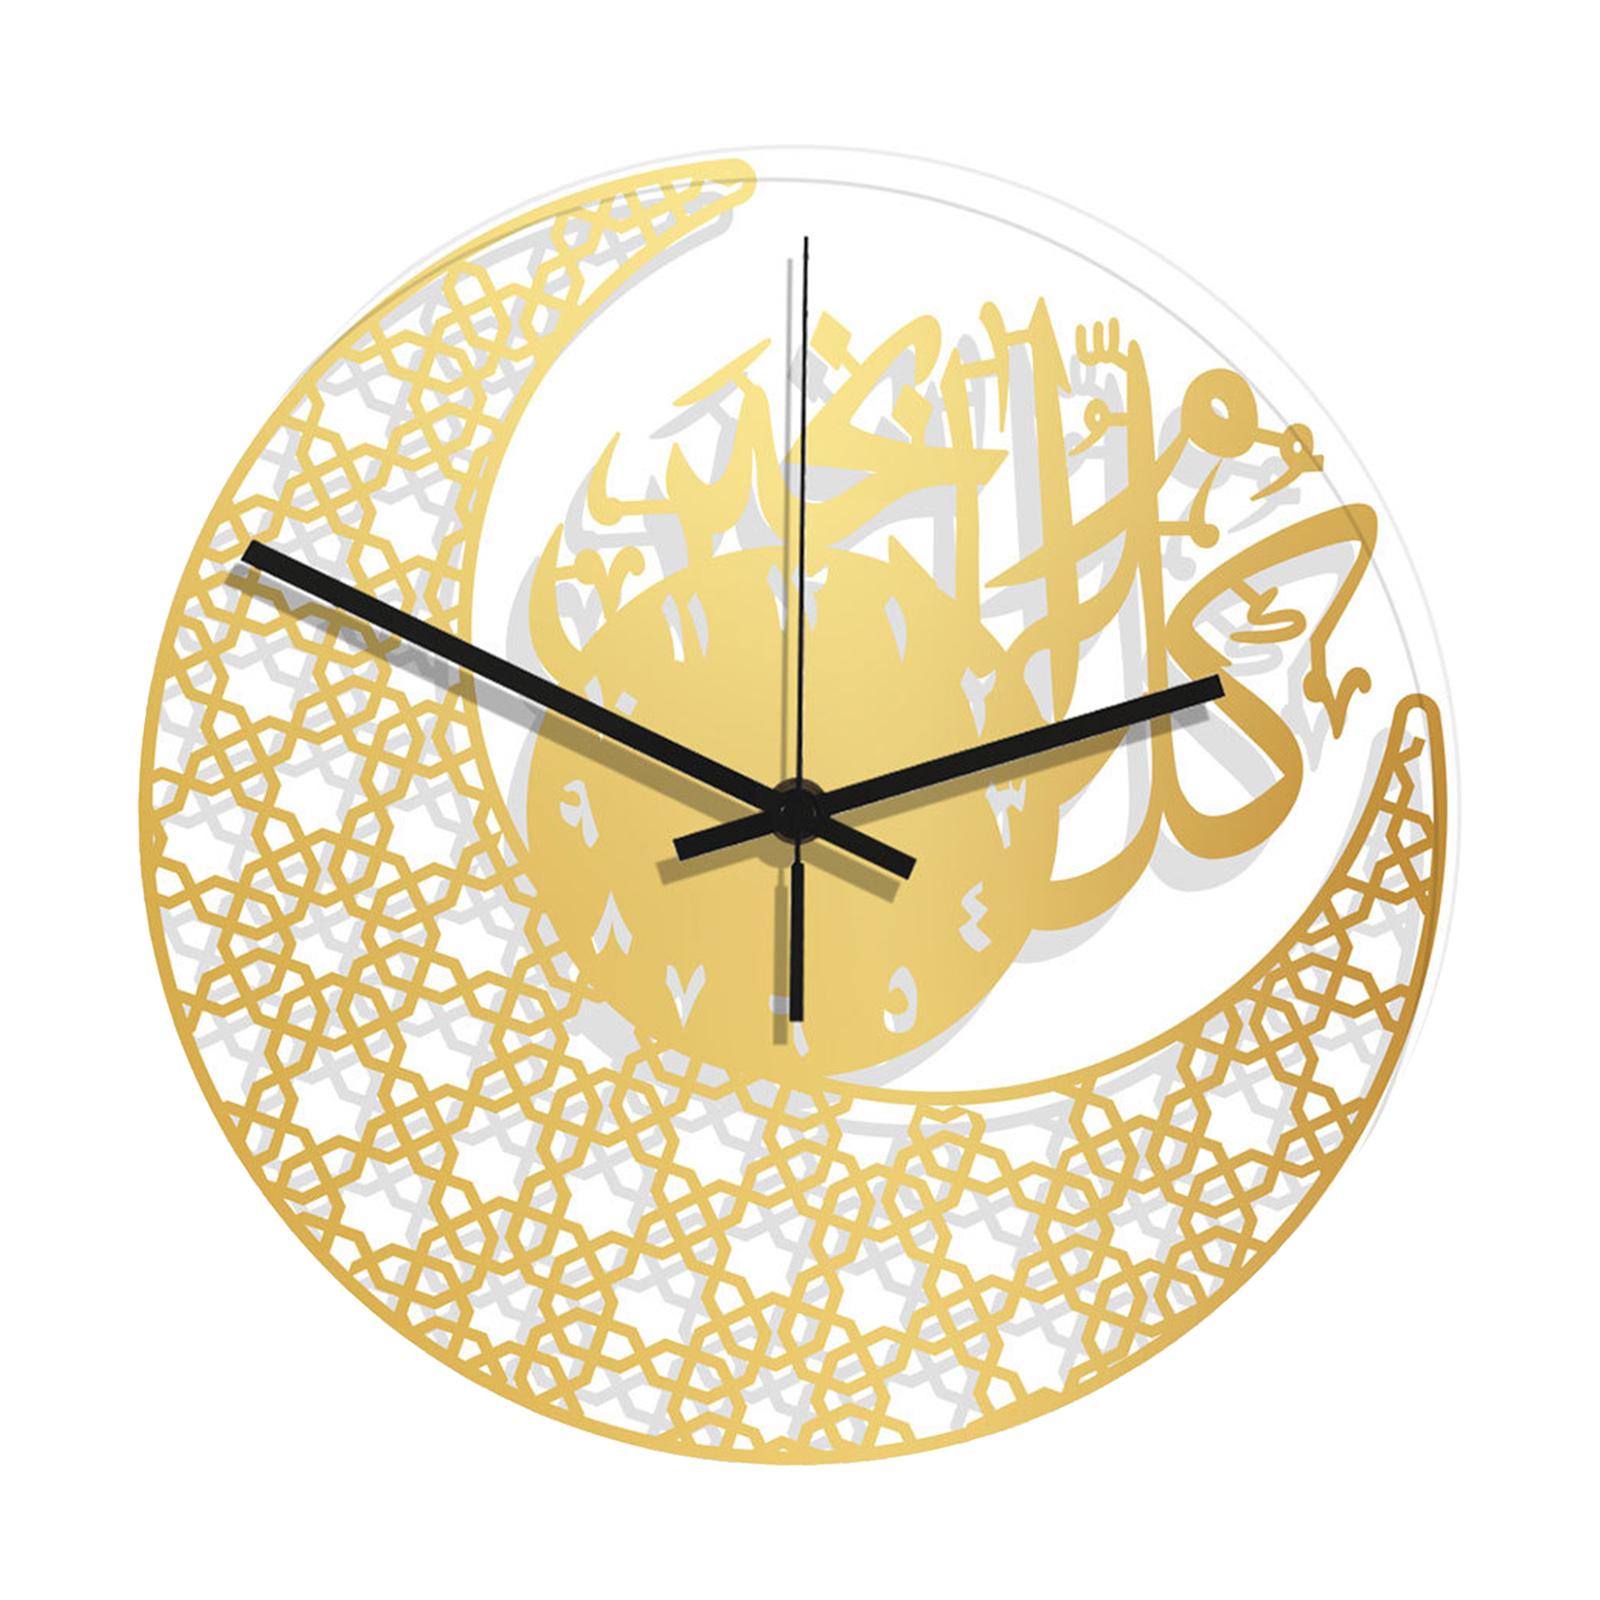 Islamic Calligraphy Wall Clock Silent Decorative for Home Kitchen Wall Decor Gold